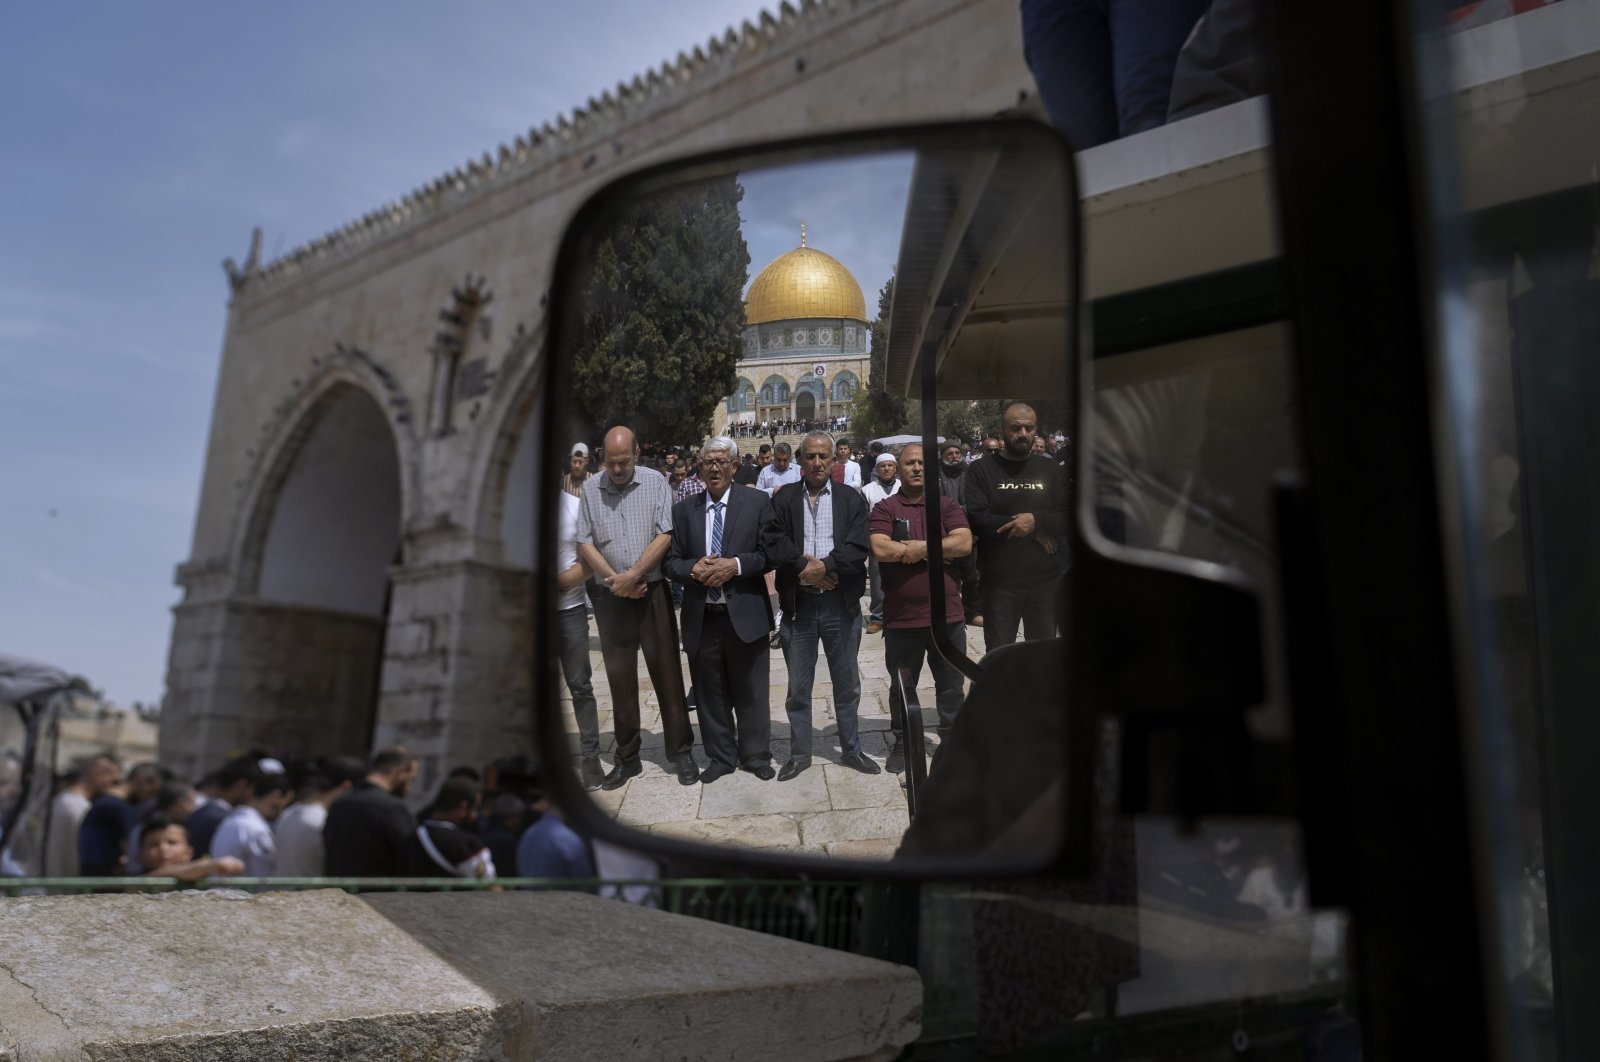 Muslim men are reflected in a mirror as they offer Friday prayers next to the Dome of the Rock Mosque in the Al-Aqsa Mosque complex in occupied East Jerusalem, Palestine, April 1, 2022. (AP Photo)